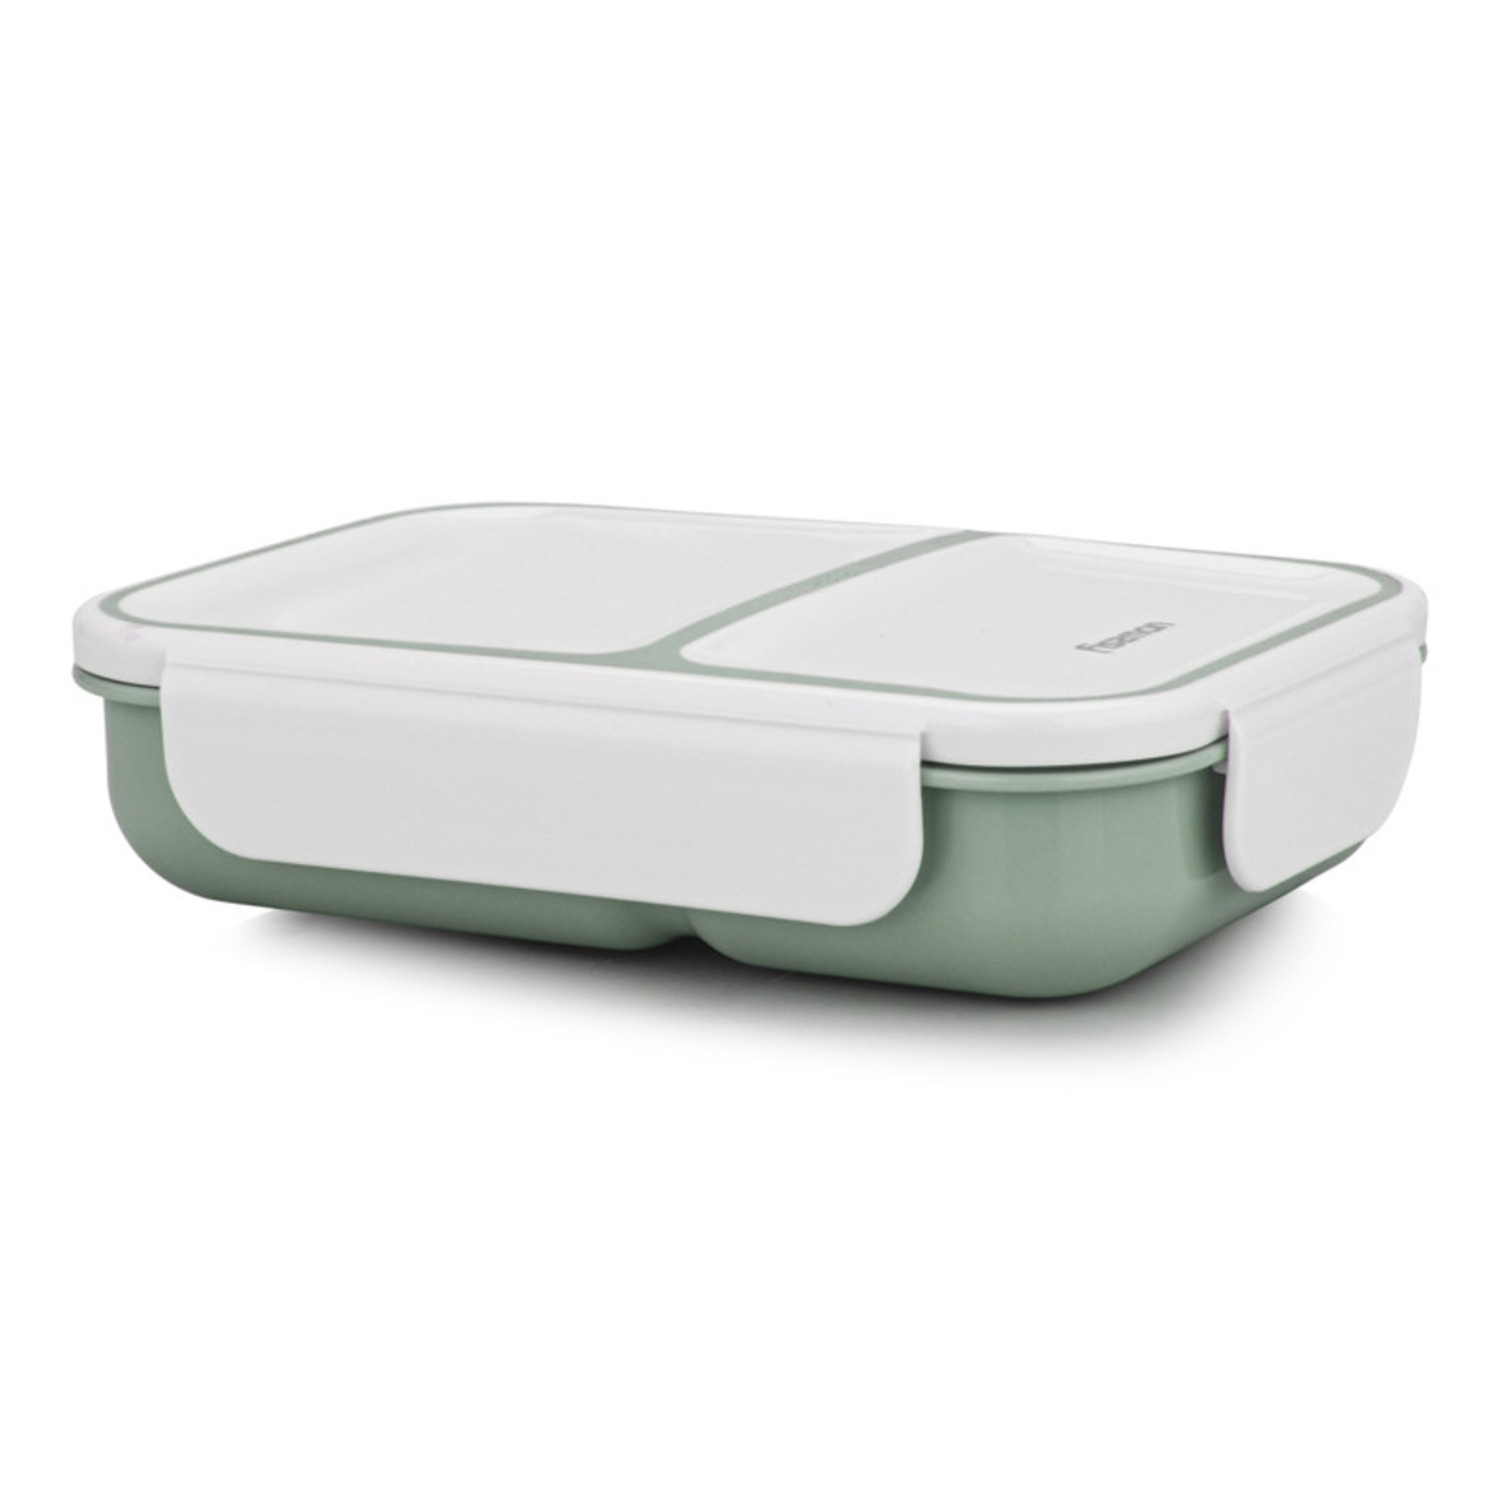 Fissman Lunch Box With Two Compartments 20X14X4.5Cm